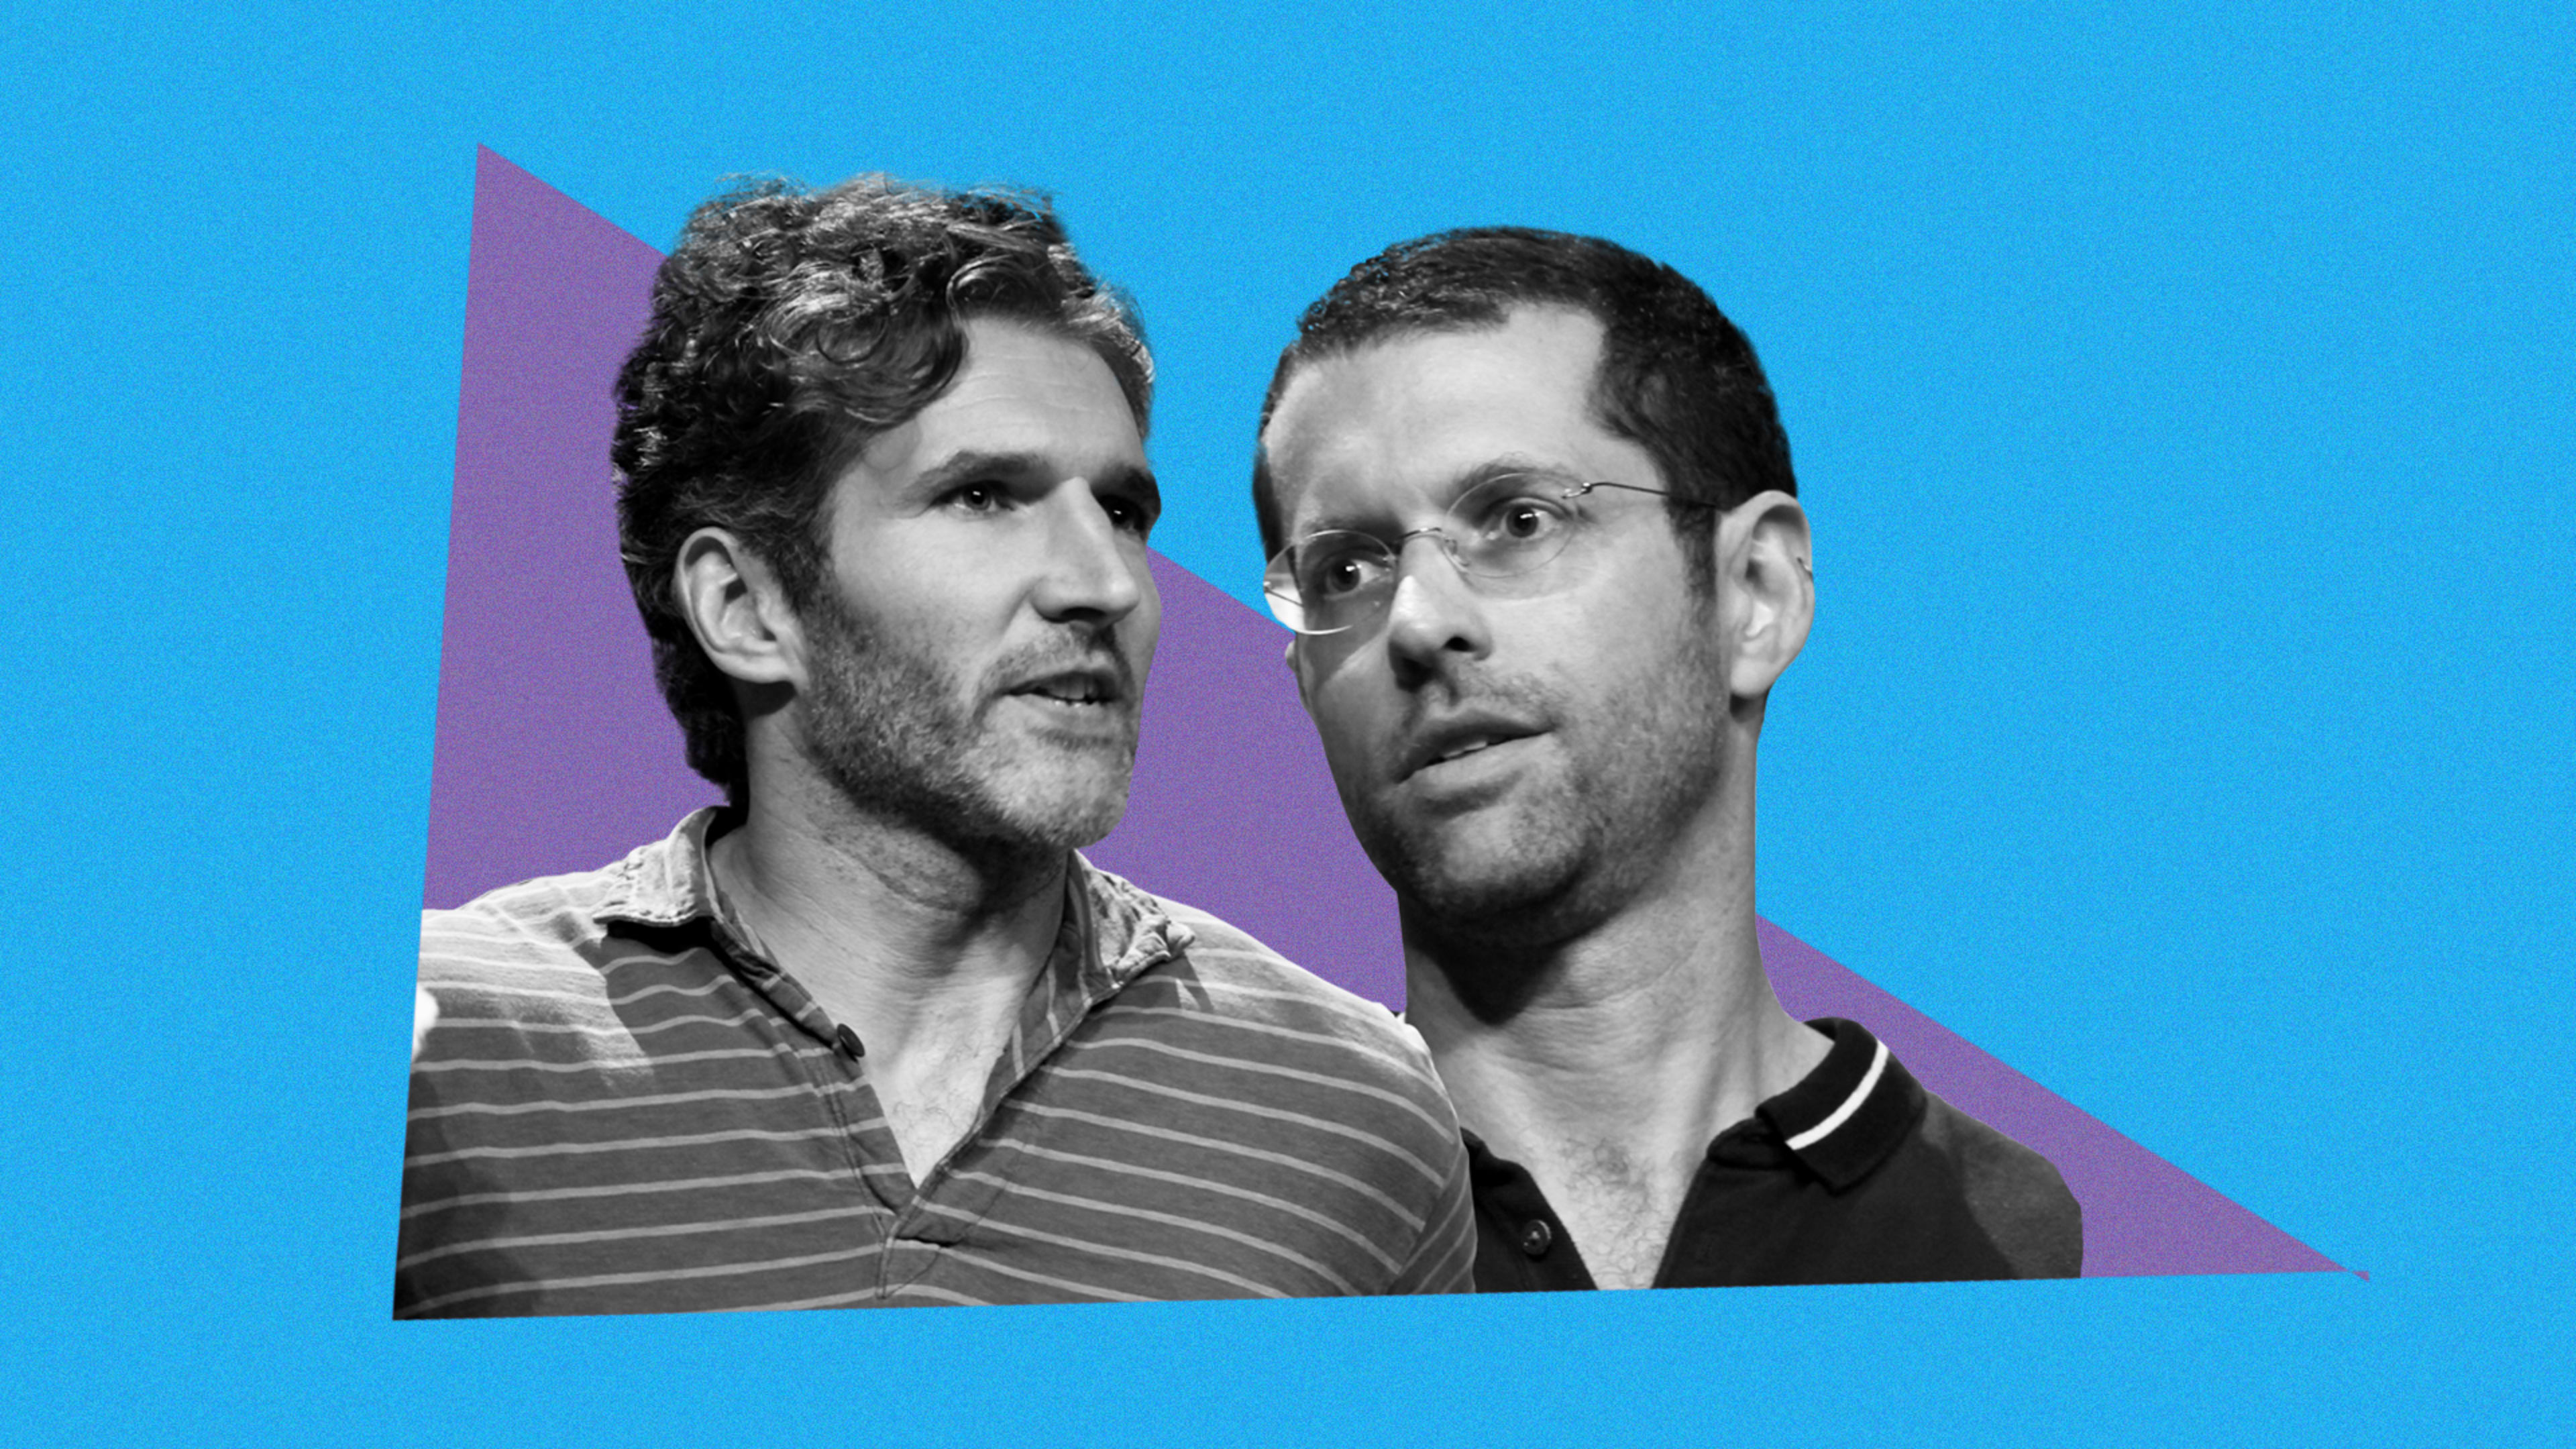 The unbelievable timeline of how Benioff and Weiss went from ‘Game of Thrones’ gods to ‘Star Wars’ goats